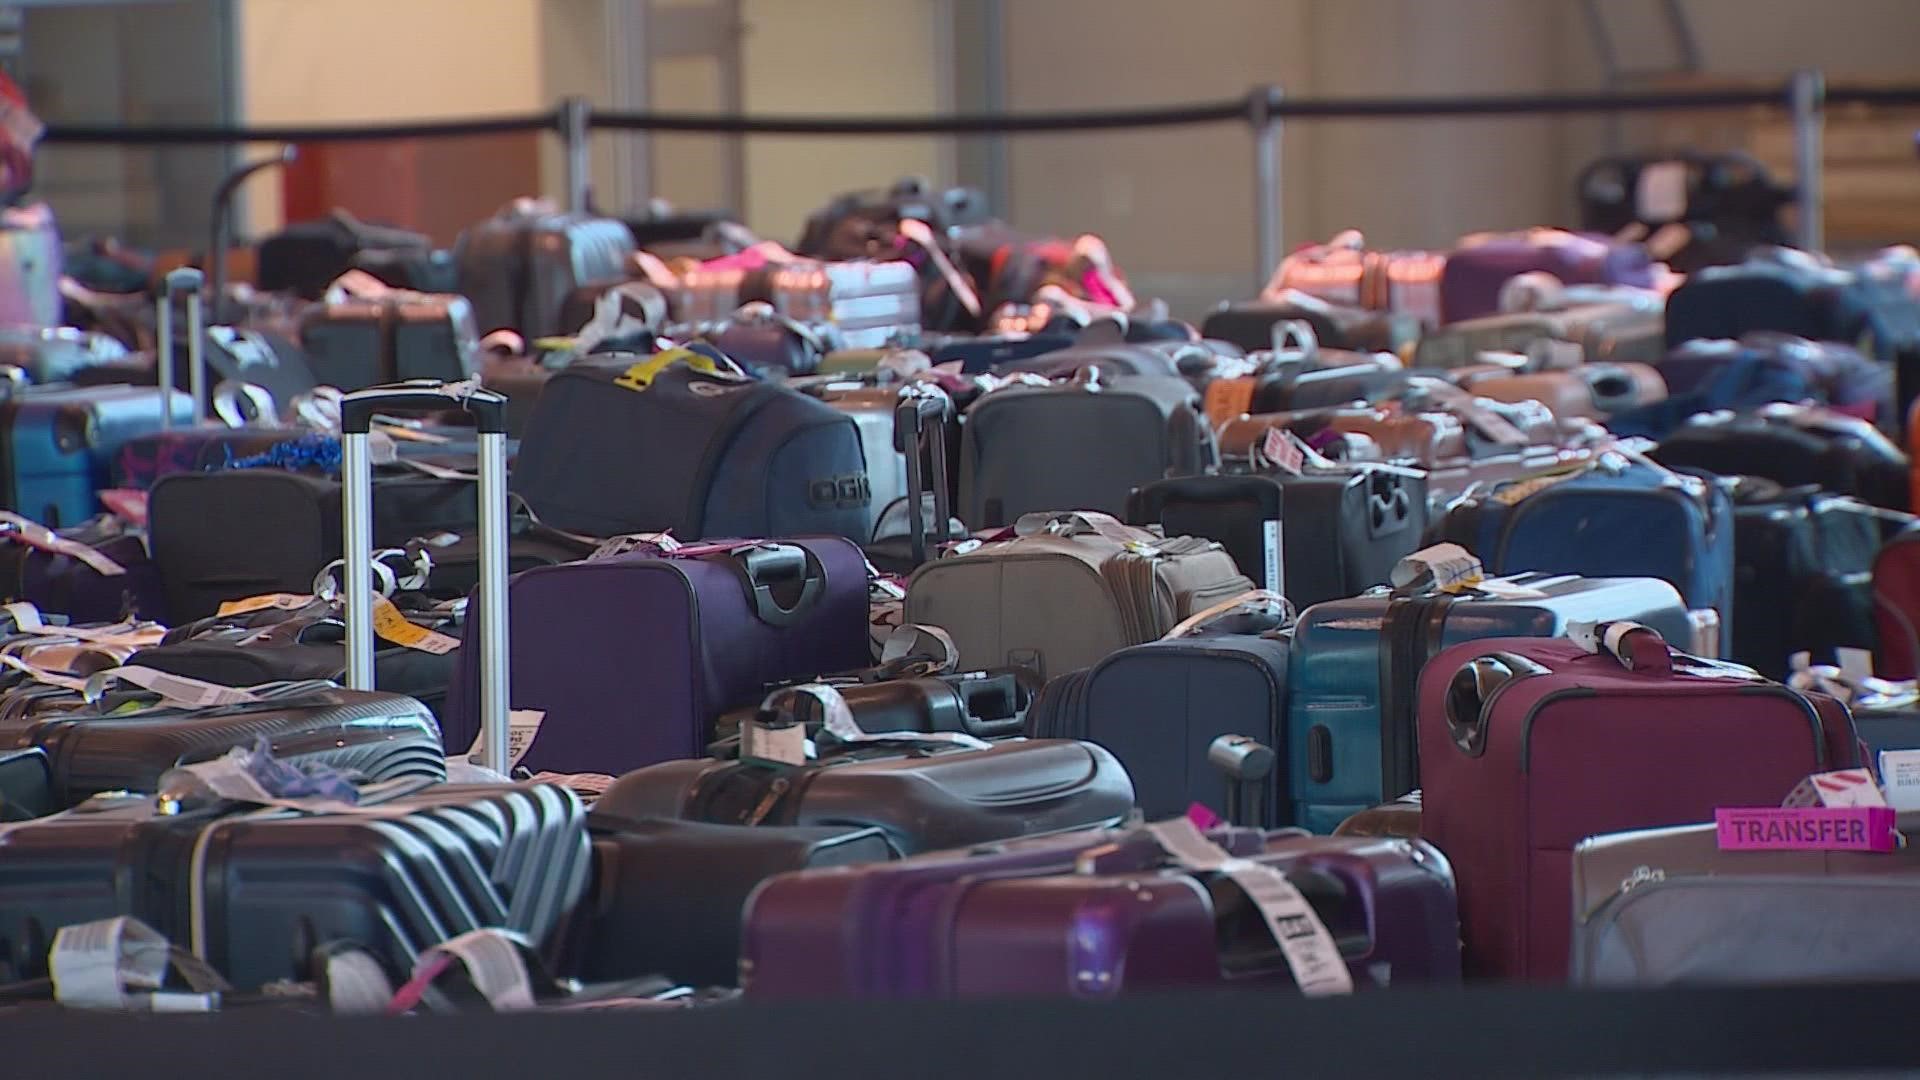 Southwest meltdown: Airline updates process to fix baggage issues | wfaa.com